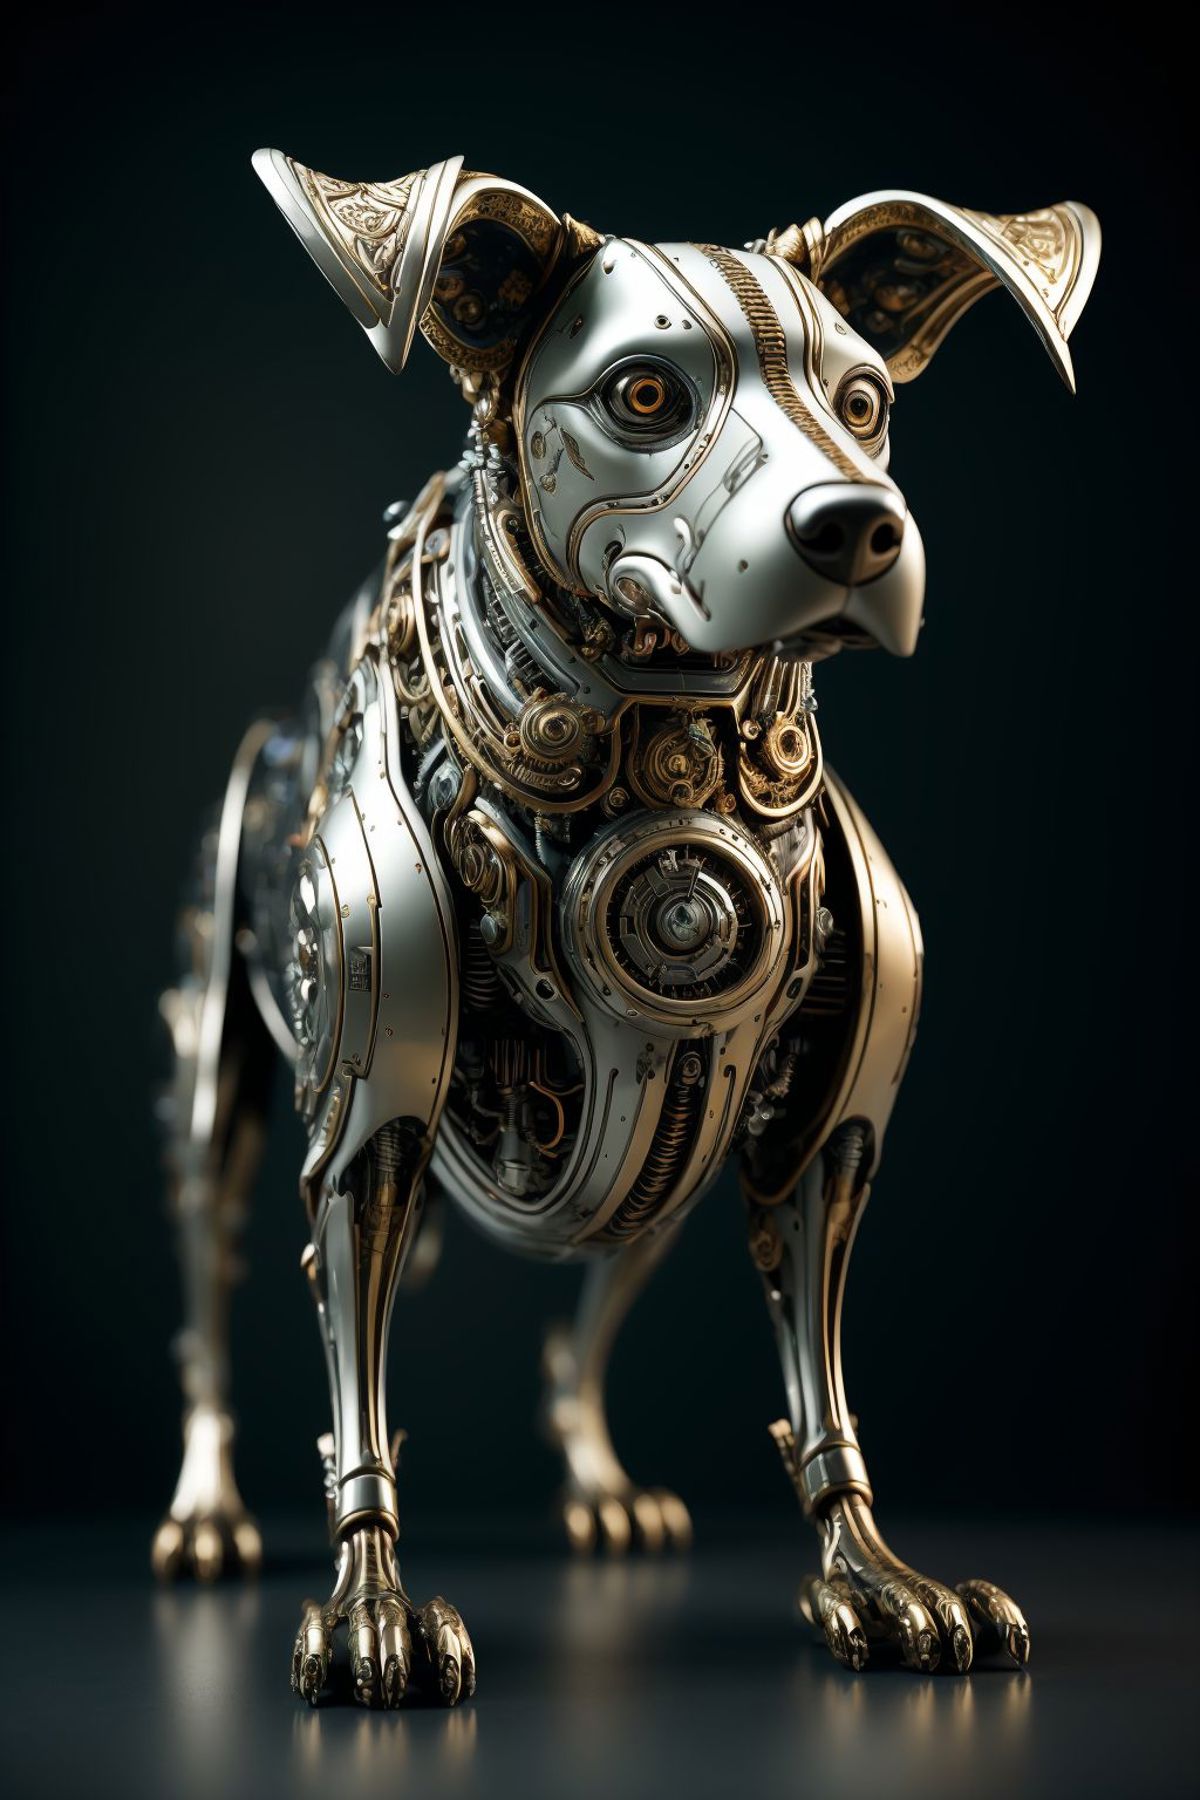 mechanical dog image by ChaosOrchestrator